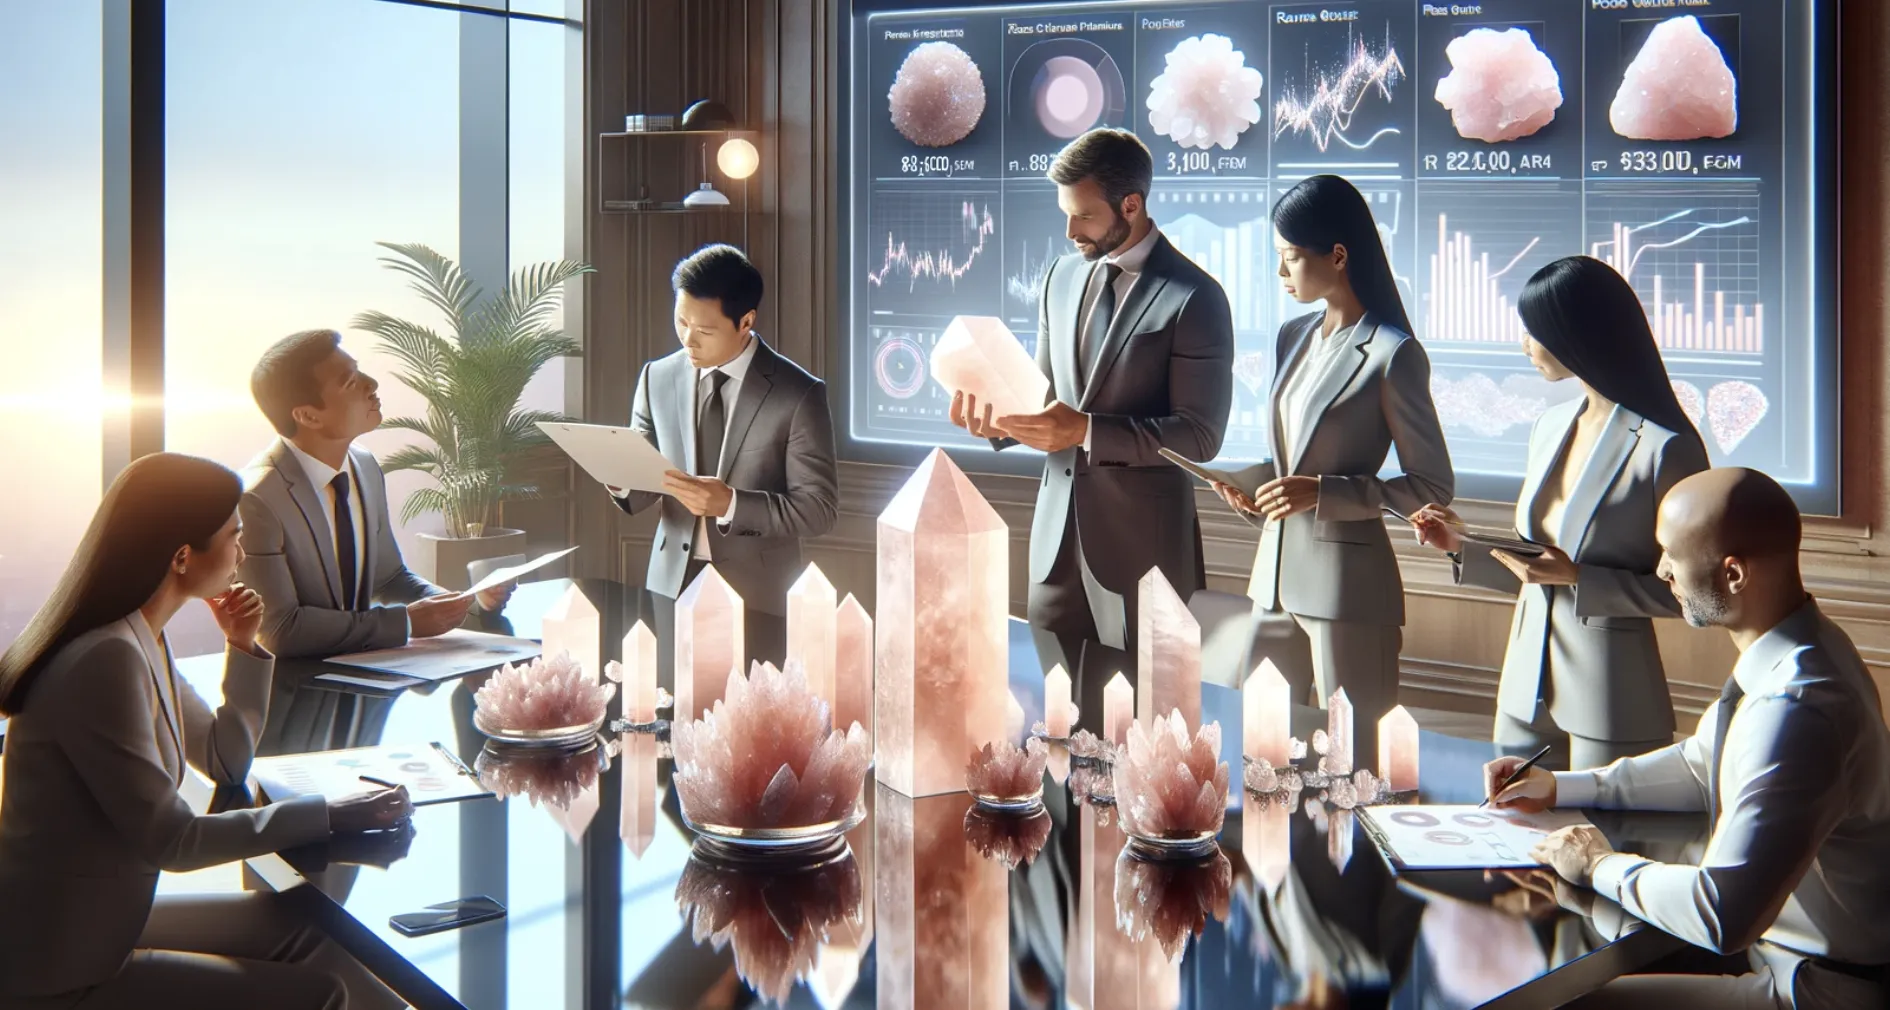 photo of people wearing suits with rose quartz crystals on an office desk